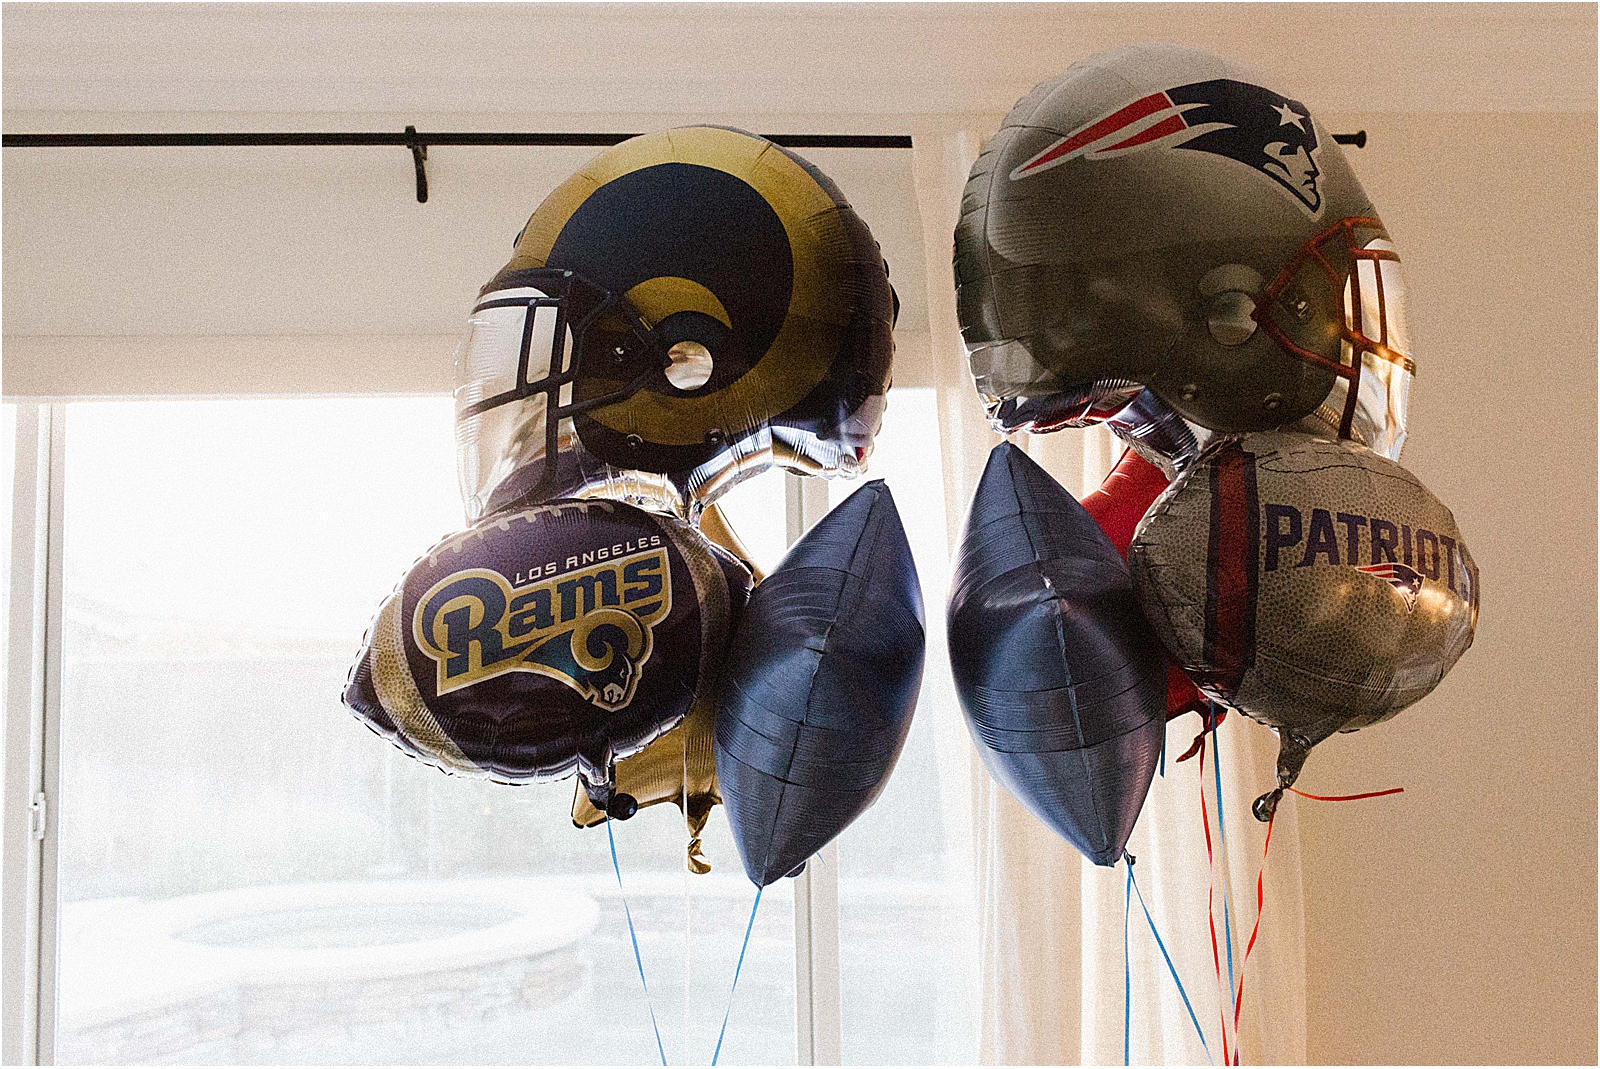 Super Bowl Party balloons